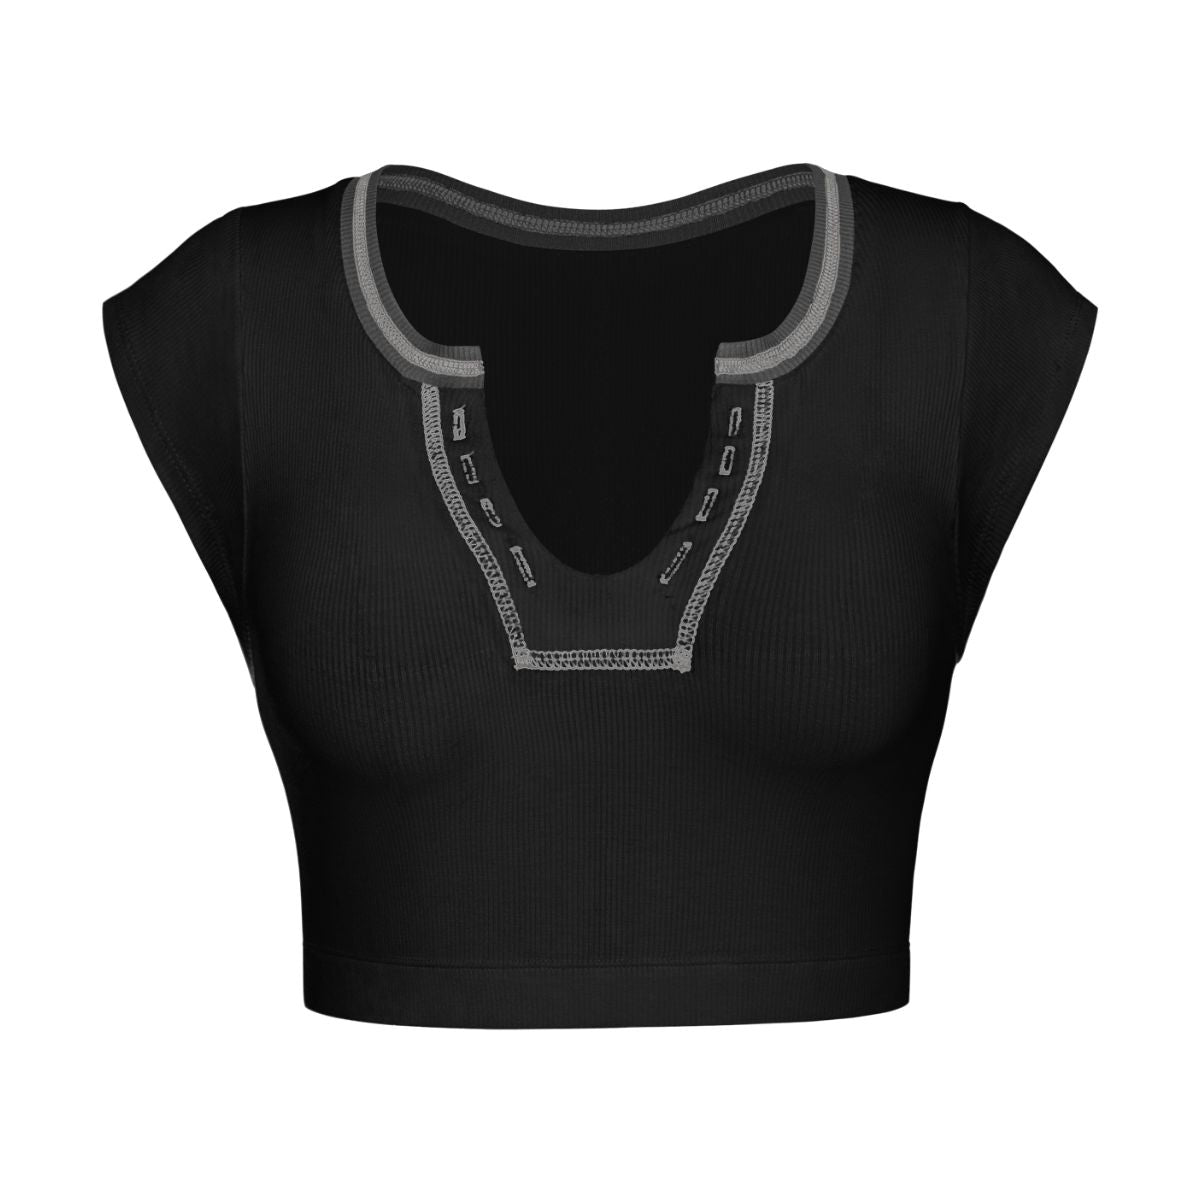 Black Notched Neck Cap Sleeve Cropped Tee Sentient Beauty Fashions Apparel & Accessories